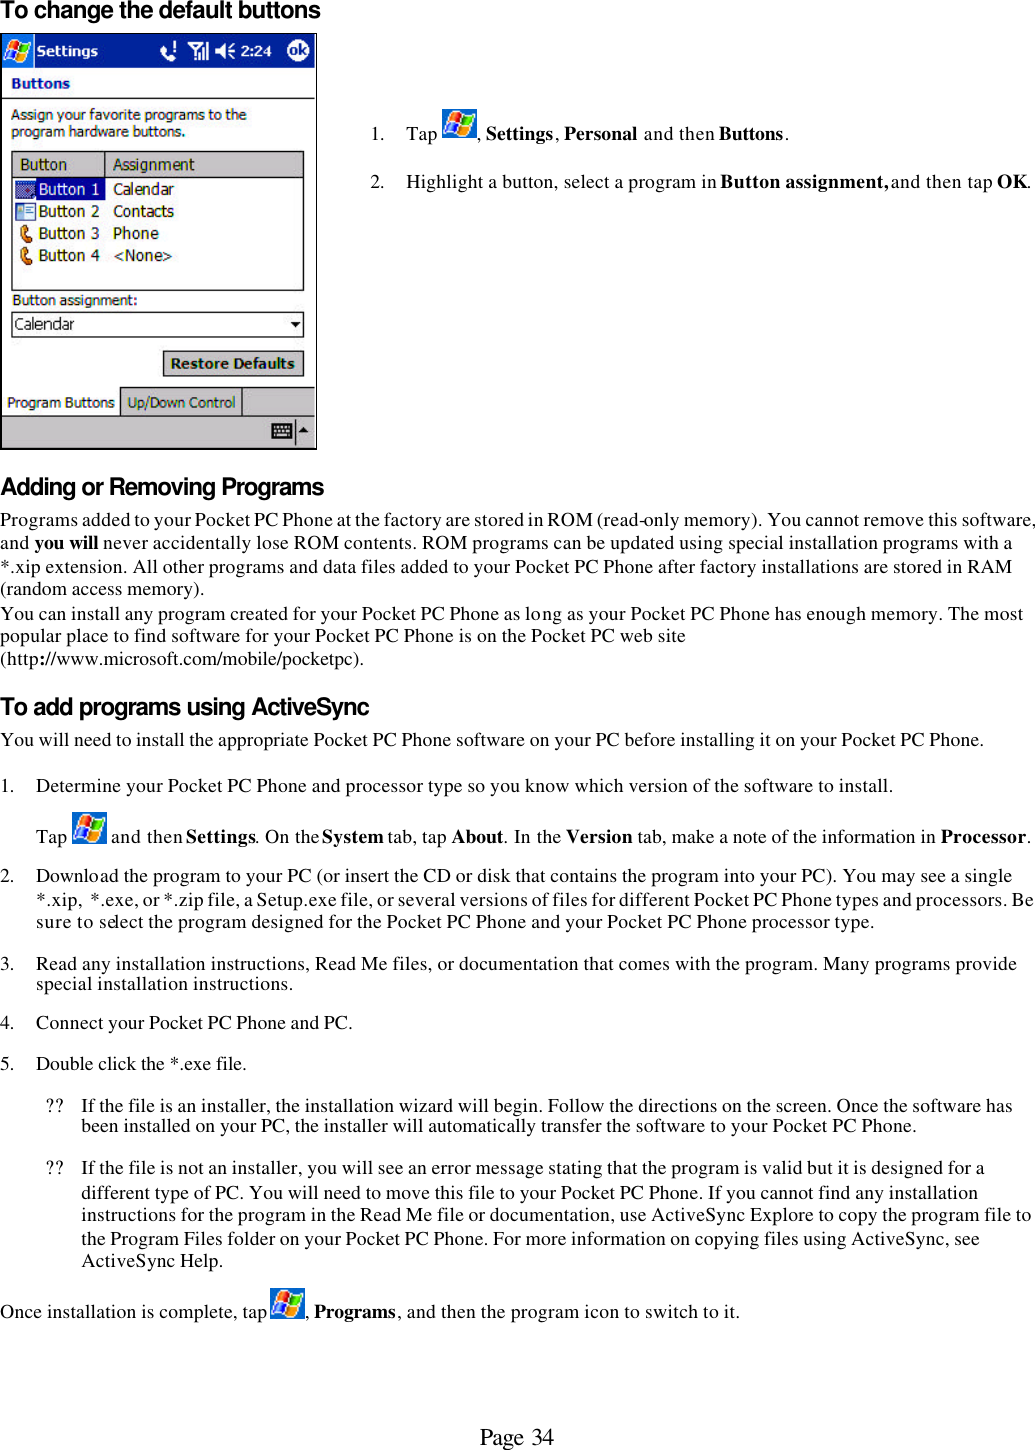 Page 34 To change the default buttons    1. Tap  , Settings, Personal and then Buttons.  2. Highlight a button, select a program in Button assignment, and then tap OK.  Adding or Removing Programs Programs added to your Pocket PC Phone at the factory are stored in ROM (read-only memory). You cannot remove this software, and you will never accidentally lose ROM contents. ROM programs can be updated using special installation programs with a *.xip extension. All other programs and data files added to your Pocket PC Phone after factory installations are stored in RAM (random access memory).  You can install any program created for your Pocket PC Phone as long as your Pocket PC Phone has enough memory. The most popular place to find software for your Pocket PC Phone is on the Pocket PC web site (http://www.microsoft.com/mobile/pocketpc). To add programs using ActiveSync You will need to install the appropriate Pocket PC Phone software on your PC before installing it on your Pocket PC Phone.  1. Determine your Pocket PC Phone and processor type so you know which version of the software to install.  Tap   and then Settings. On the System tab, tap About. In the Version tab, make a note of the information in Processor.  2. Download the program to your PC (or insert the CD or disk that contains the program into your PC). You may see a single *.xip,  *.exe, or *.zip file, a Setup.exe file, or several versions of files for different Pocket PC Phone types and processors. Be sure to select the program designed for the Pocket PC Phone and your Pocket PC Phone processor type. 3. Read any installation instructions, Read Me files, or documentation that comes with the program. Many programs provide special installation instructions. 4. Connect your Pocket PC Phone and PC. 5. Double click the *.exe file. ?? If the file is an installer, the installation wizard will begin. Follow the directions on the screen. Once the software has been installed on your PC, the installer will automatically transfer the software to your Pocket PC Phone.  ?? If the file is not an installer, you will see an error message stating that the program is valid but it is designed for a different type of PC. You will need to move this file to your Pocket PC Phone. If you cannot find any installation instructions for the program in the Read Me file or documentation, use ActiveSync Explore to copy the program file to the Program Files folder on your Pocket PC Phone. For more information on copying files using ActiveSync, see ActiveSync Help.  Once installation is complete, tap  , Programs, and then the program icon to switch to it.  